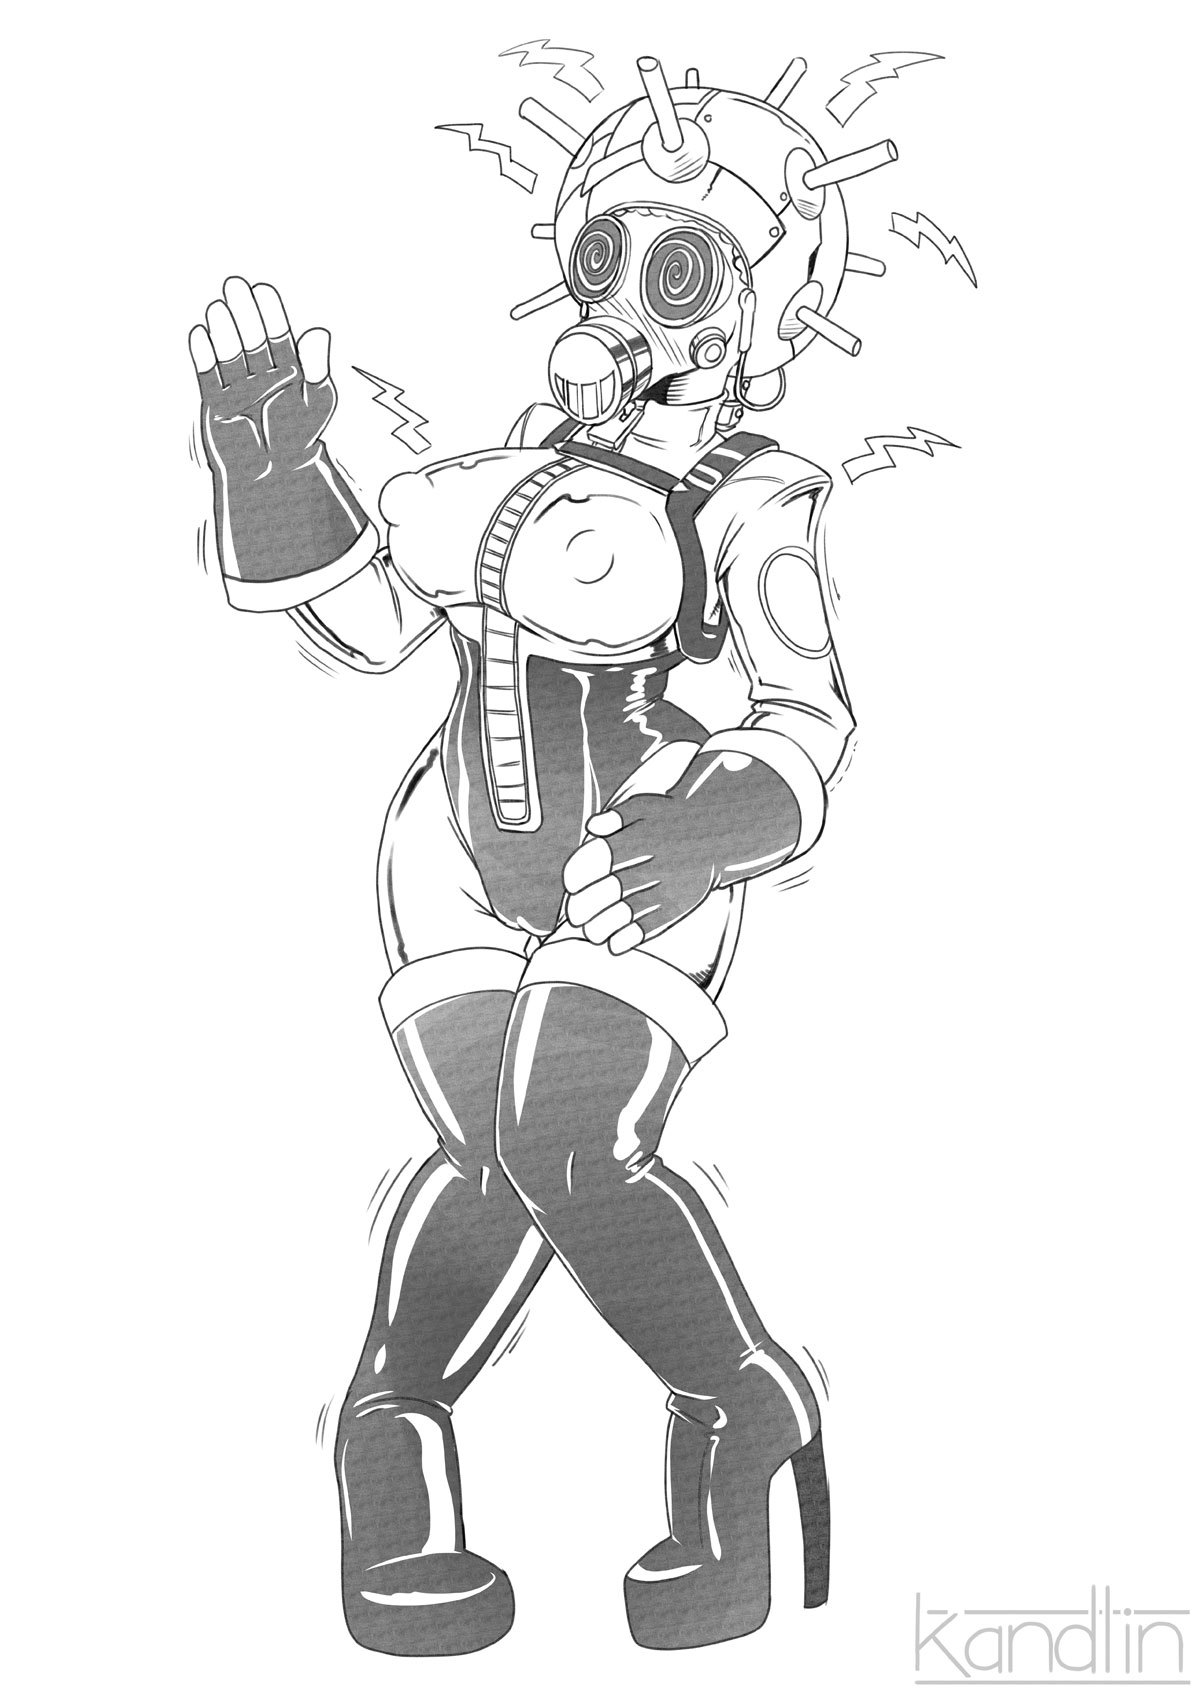 Doin the RobotSketch Stream Commission for Filflat of Pyro, getting brainwashed and